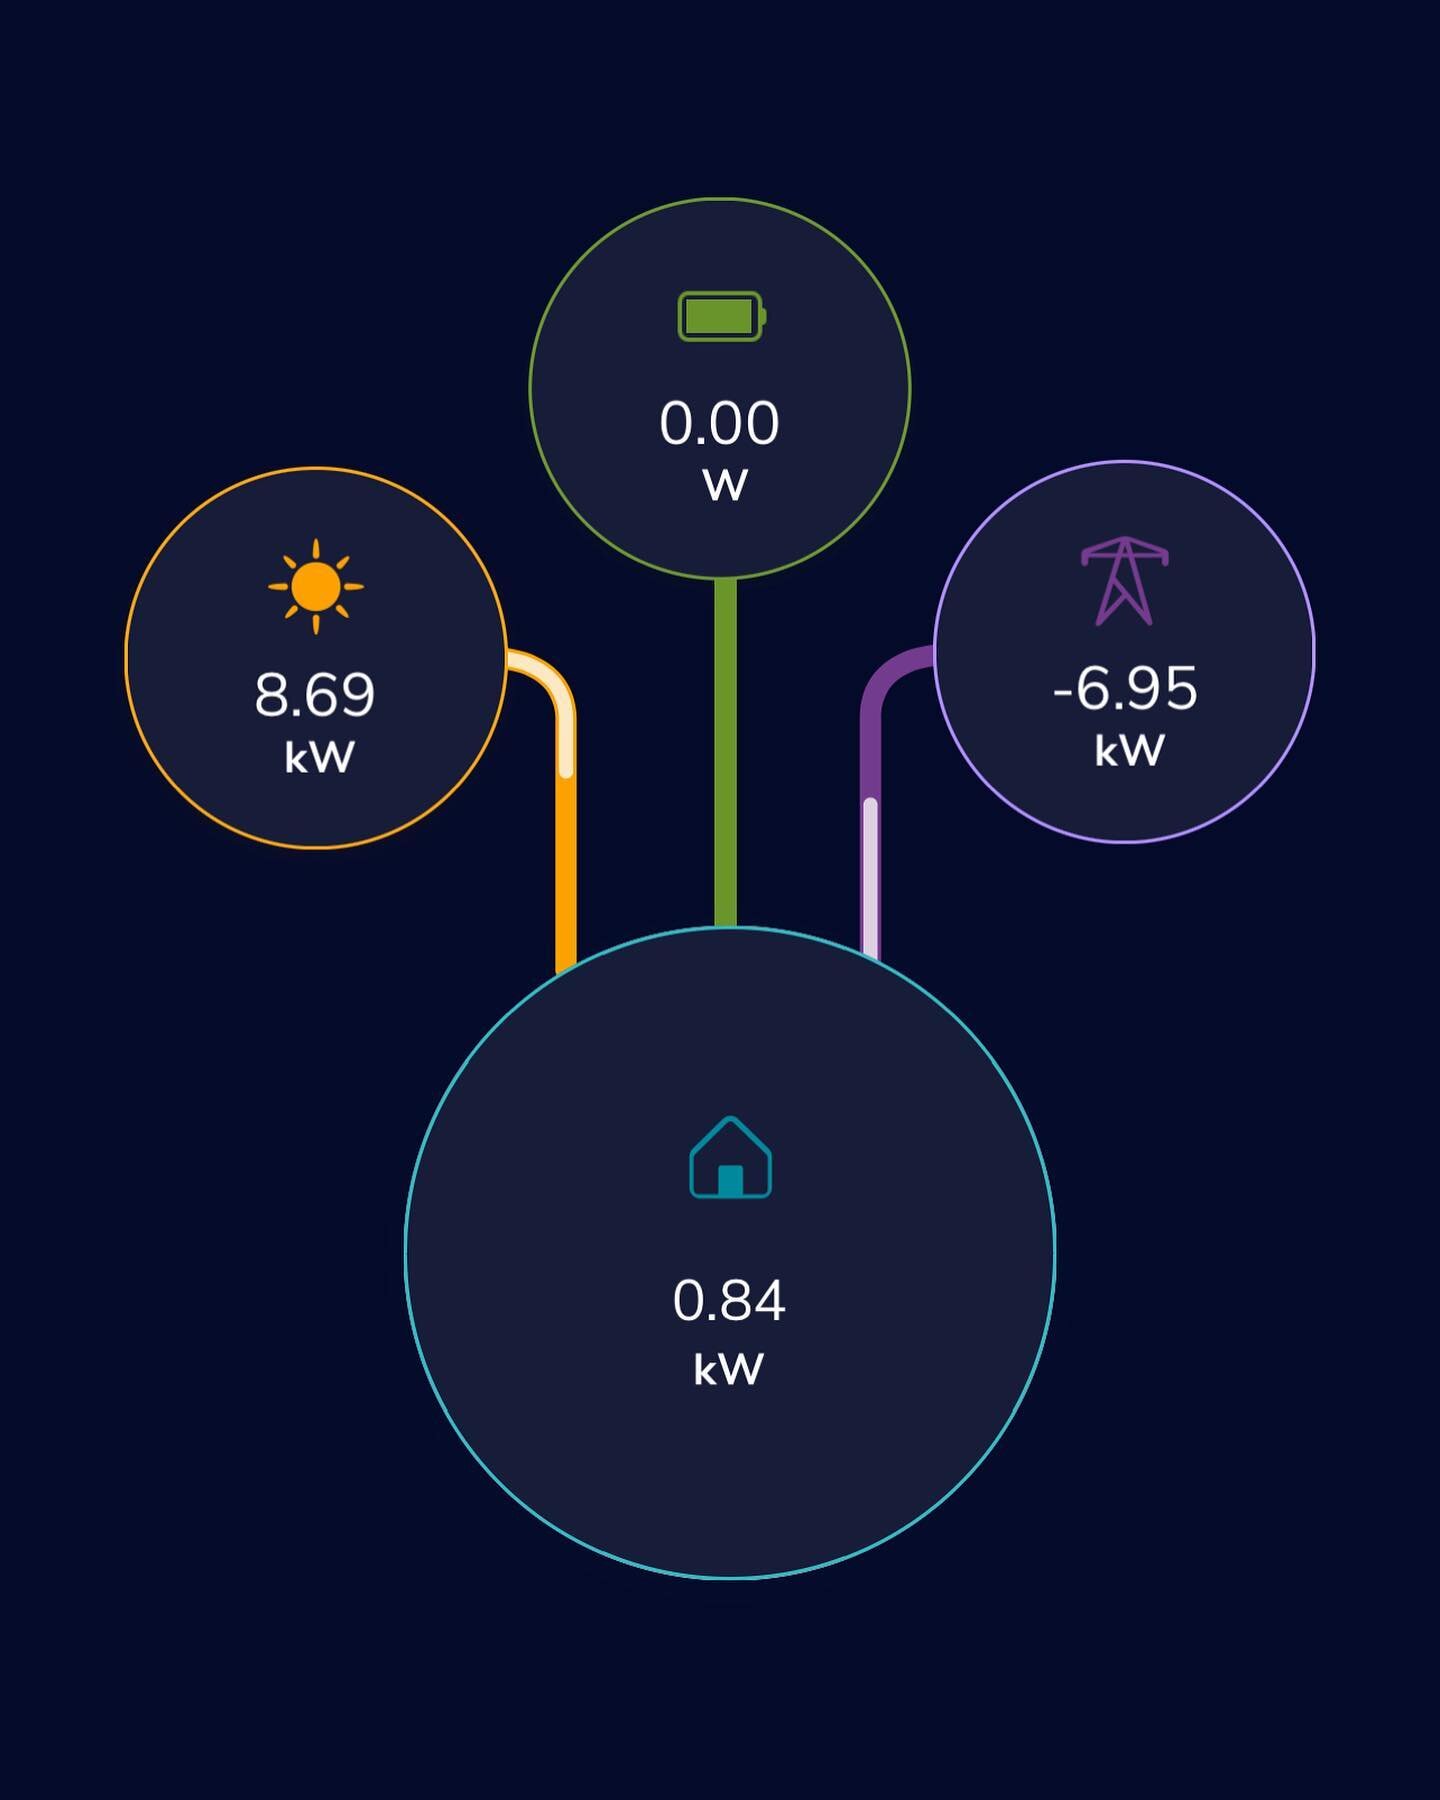 Here&rsquo;s my electrical consumption with 2 Samsung heat pumps running on low speed , and a Broan ERV &amp; Broan HRV running on low .  10kw PV system and Generic pwr storage .  Via PWRView app. 

Take away is cooling , dehumidification , and healt